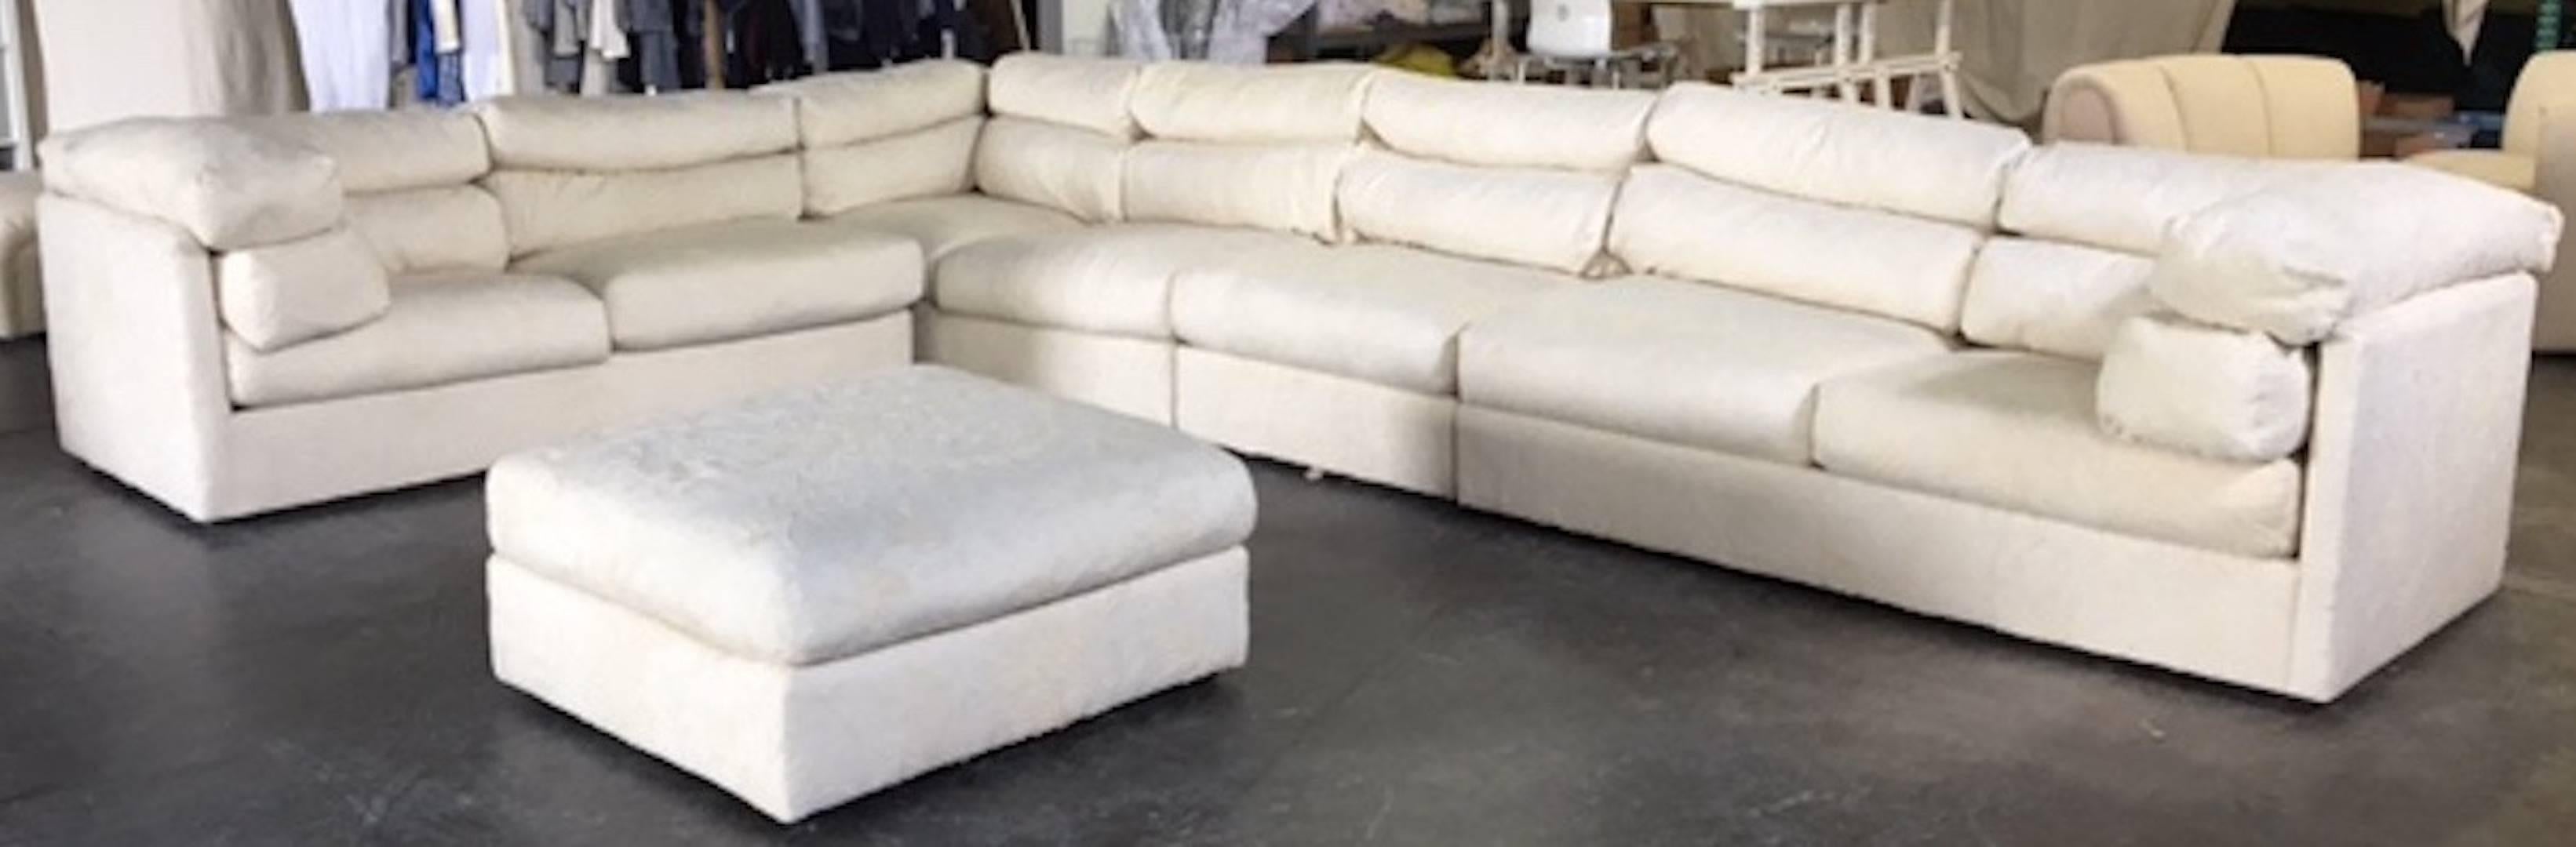 Monumental sectional sofa by Directional. This sectional is in good vintage condition and new upholstery is recommended, circa 1970s.

Dimensions: 170